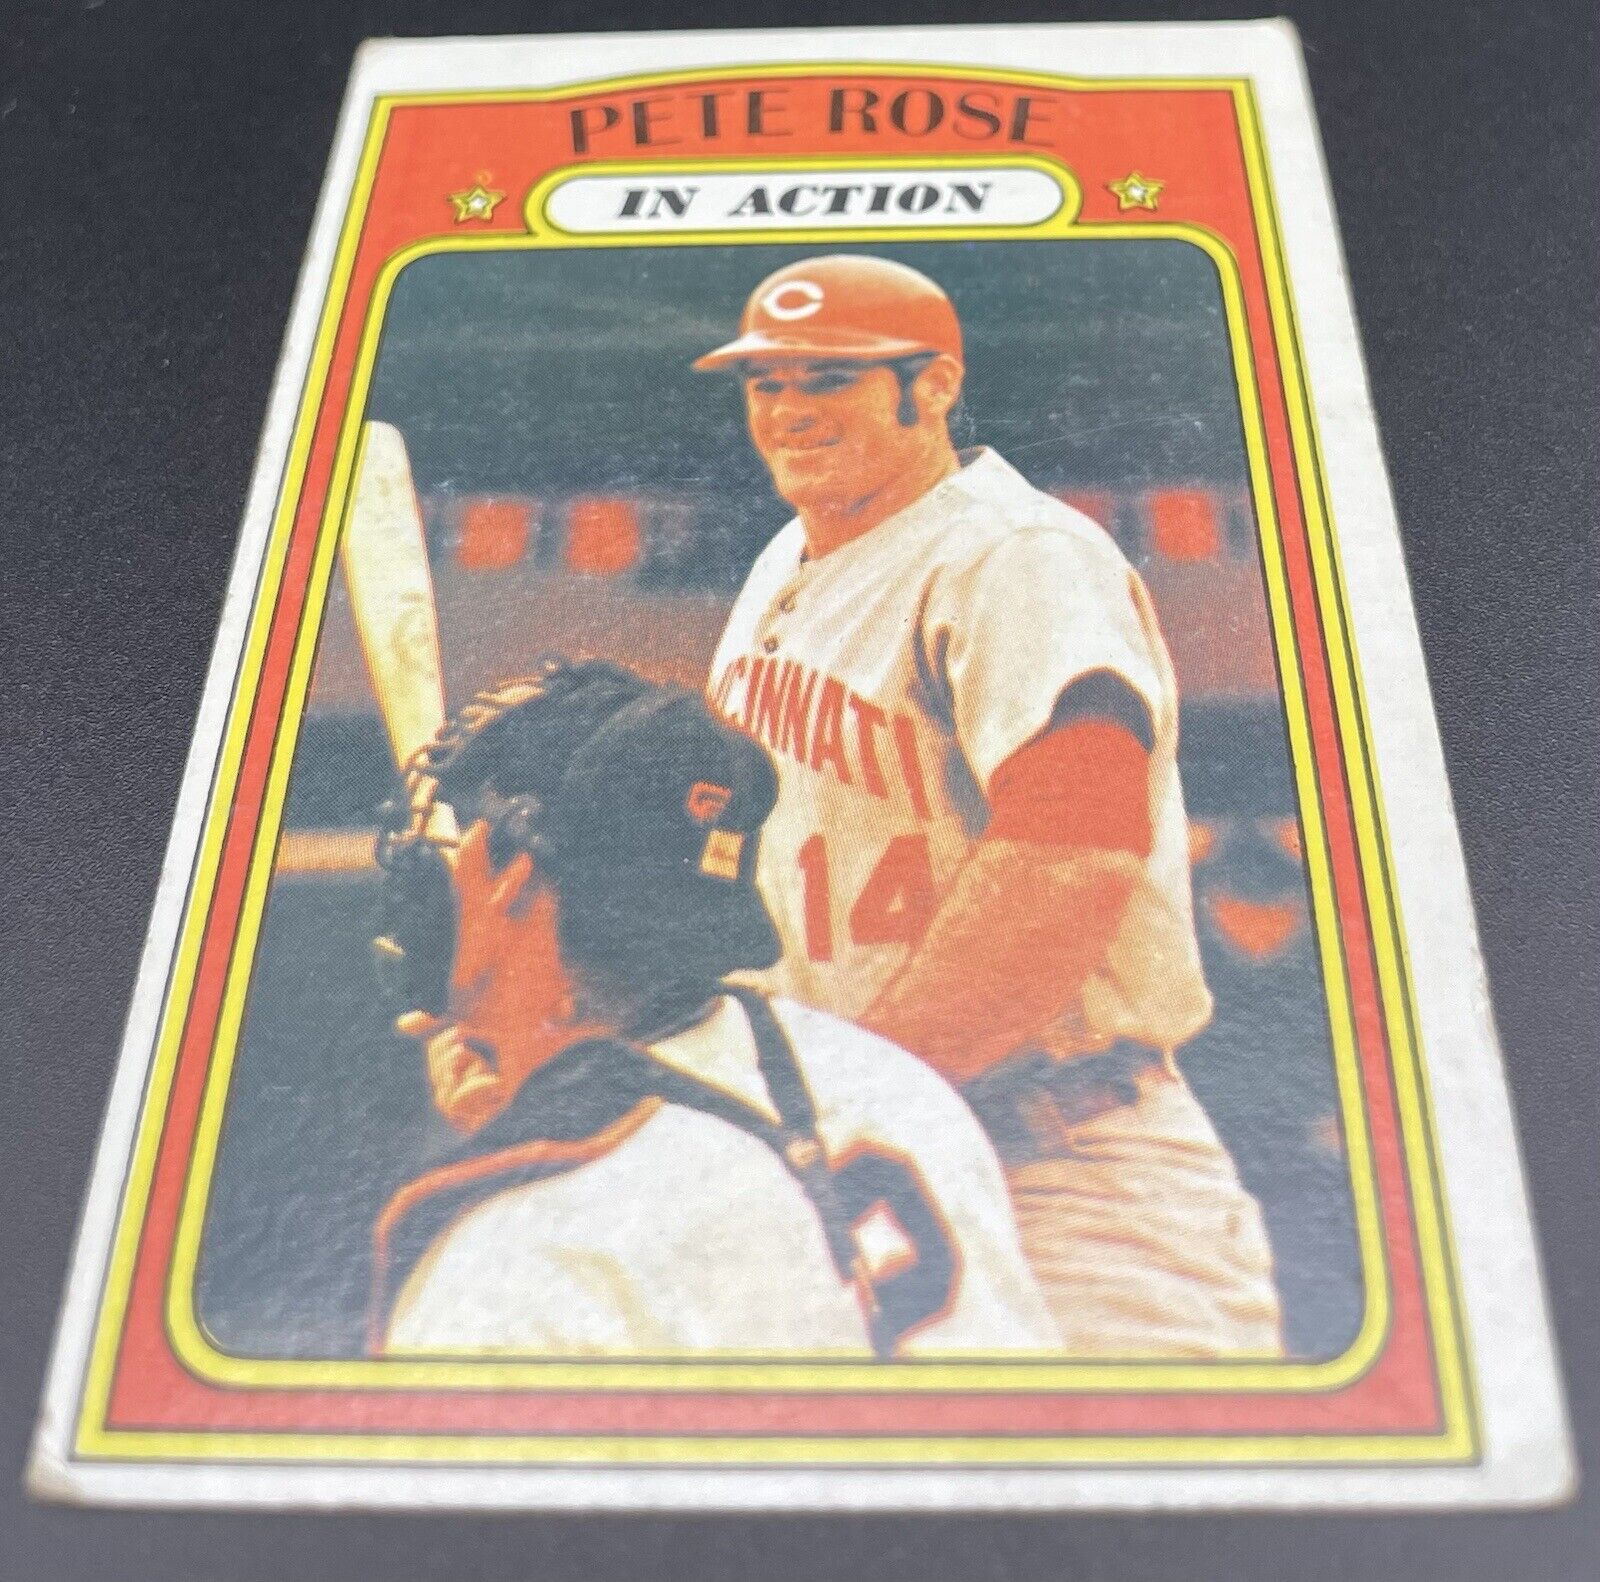 1972 Topps - In Action #560 Pete Rose